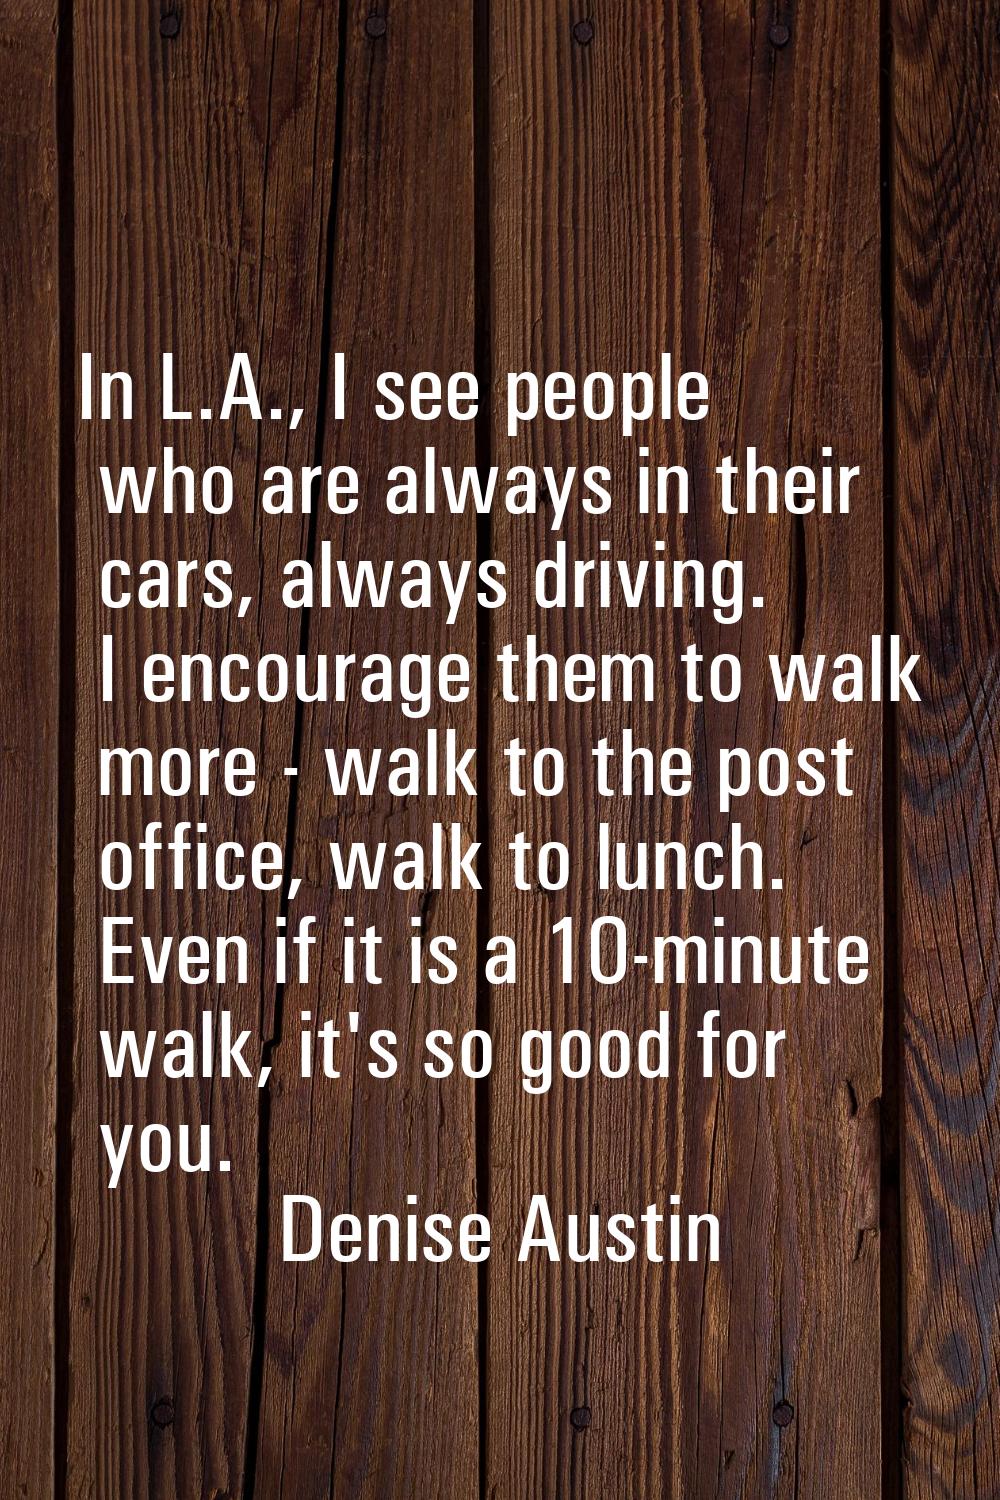 In L.A., I see people who are always in their cars, always driving. I encourage them to walk more -